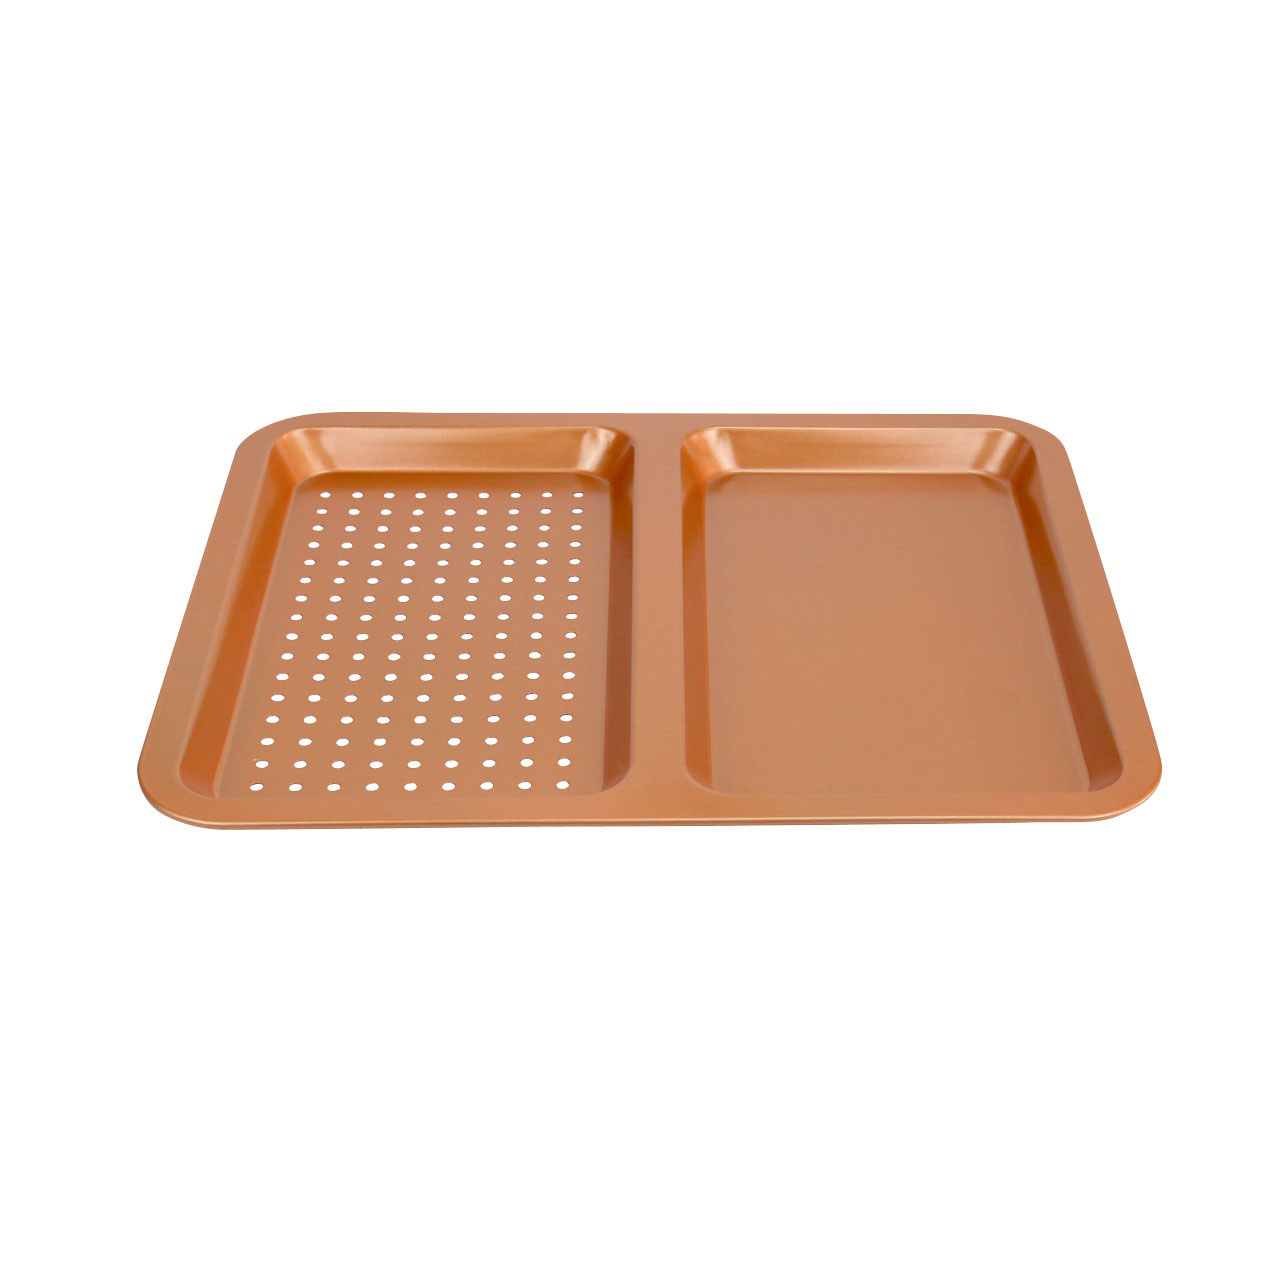 Copper Coated Two-section Baking Tray